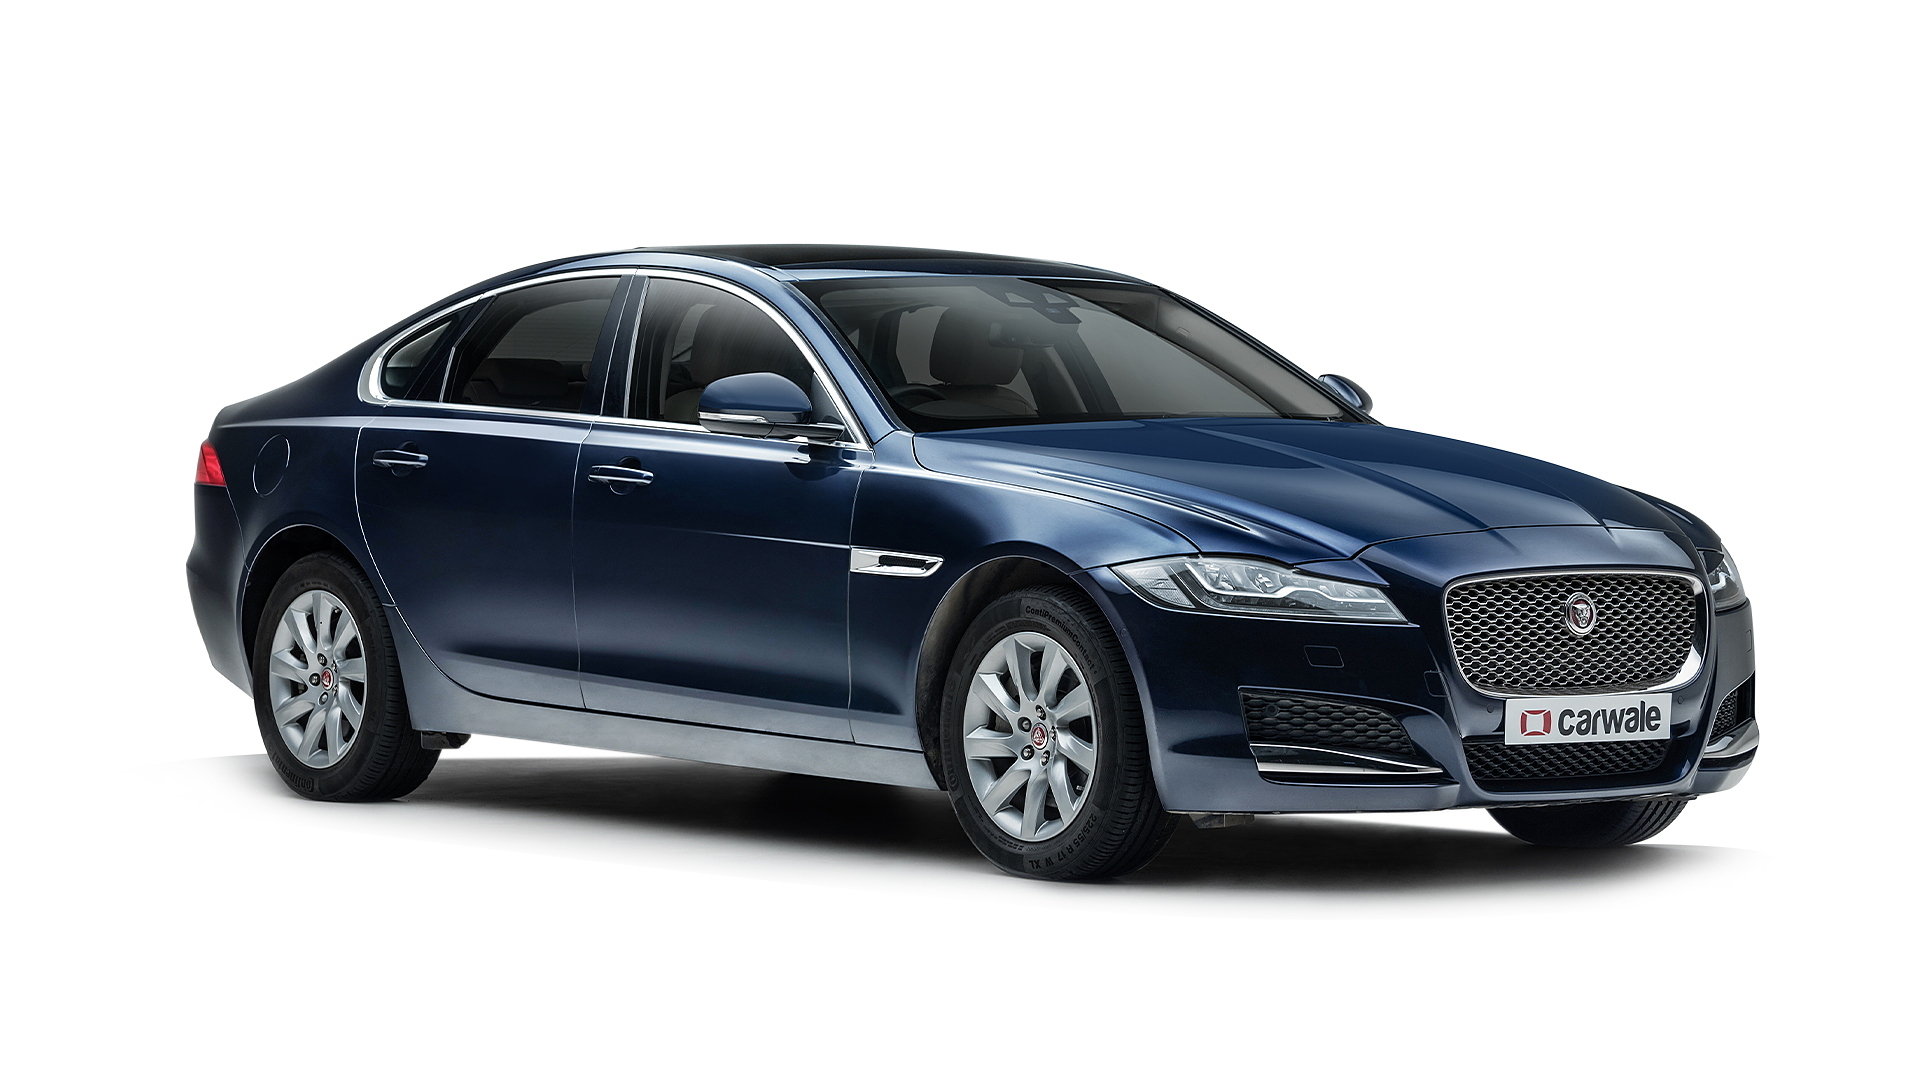 Jaguar Xf Images - Interior & Exterior Photo Gallery [250+ Images] - Carwale